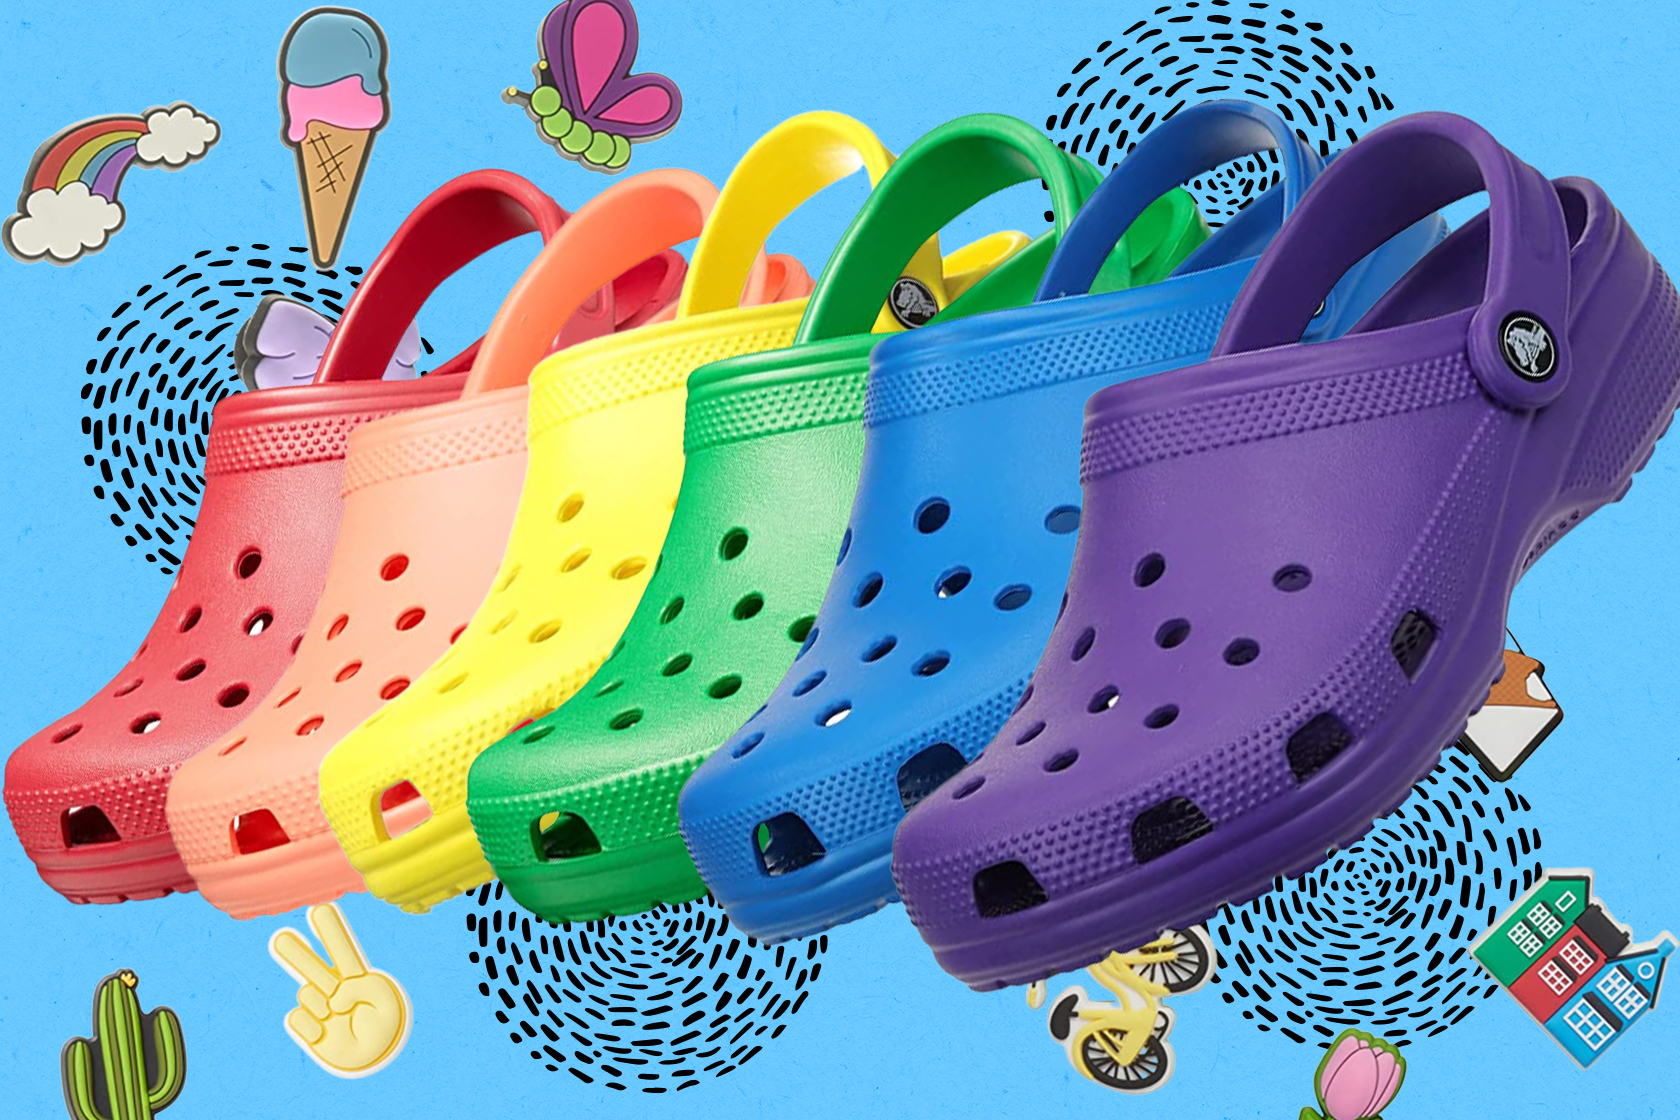 Croc charms and shoes are up to 50% off on Amazon right now